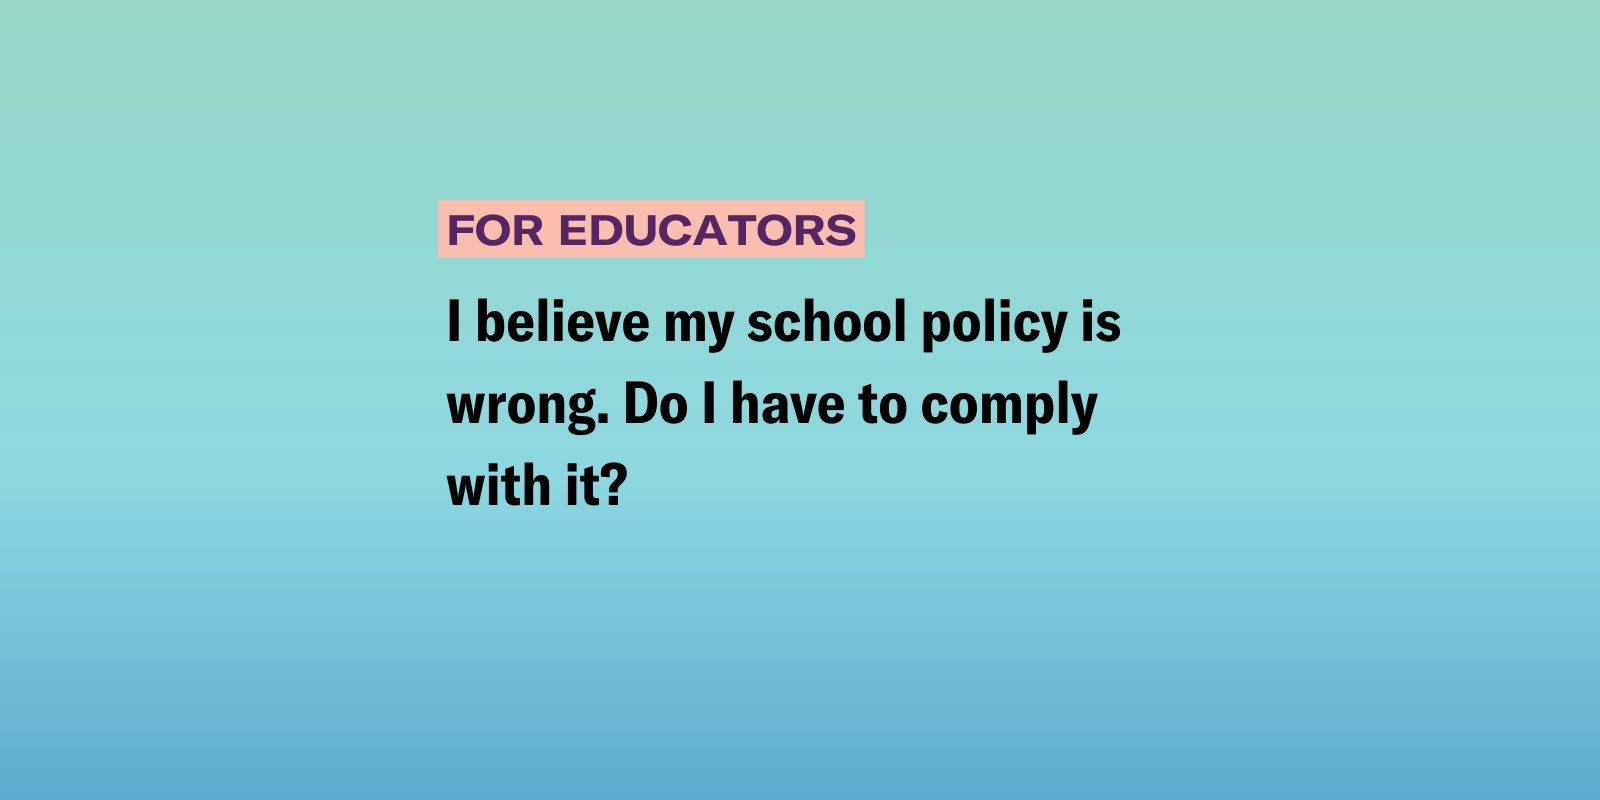 I believe my school policy is wrong. Do I have to comply with it?